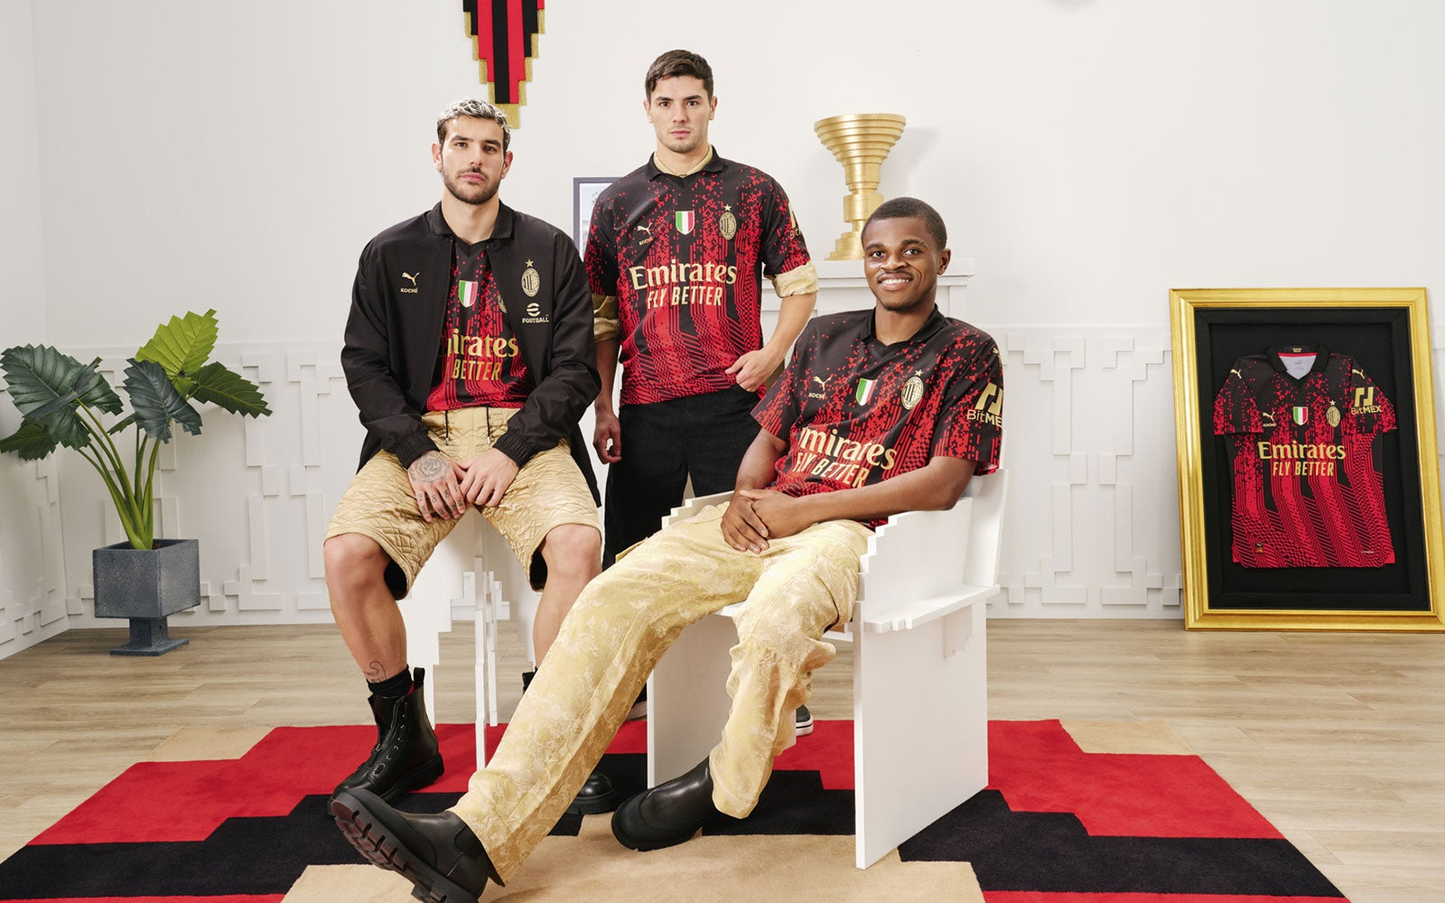 AC Milan 22/23 Fourth Jersey - Foot Jersey Now